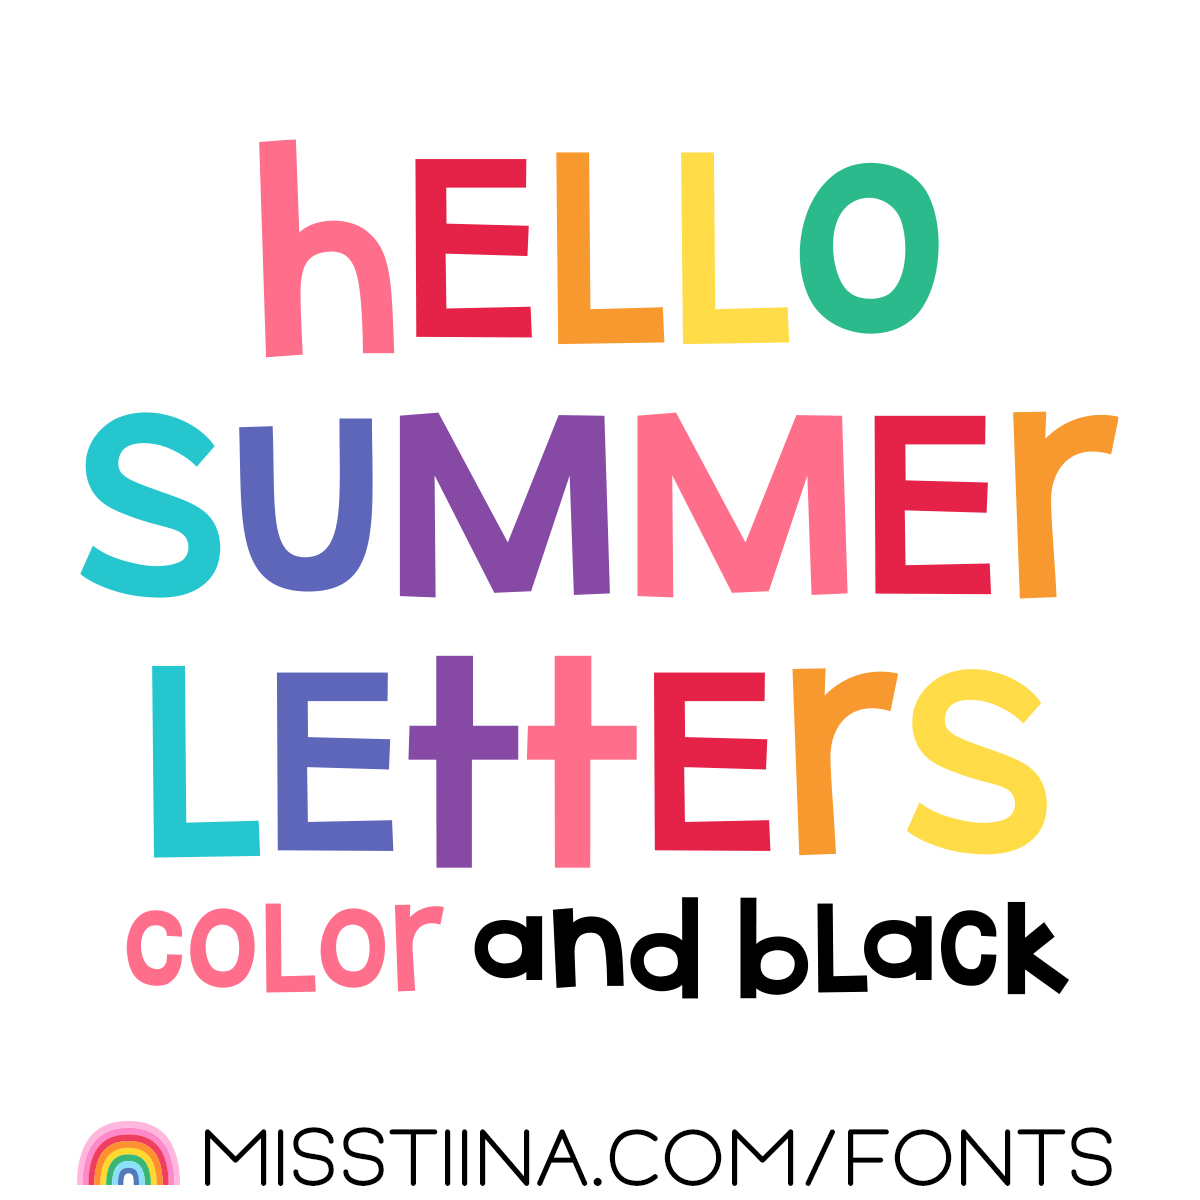 hello summer letters